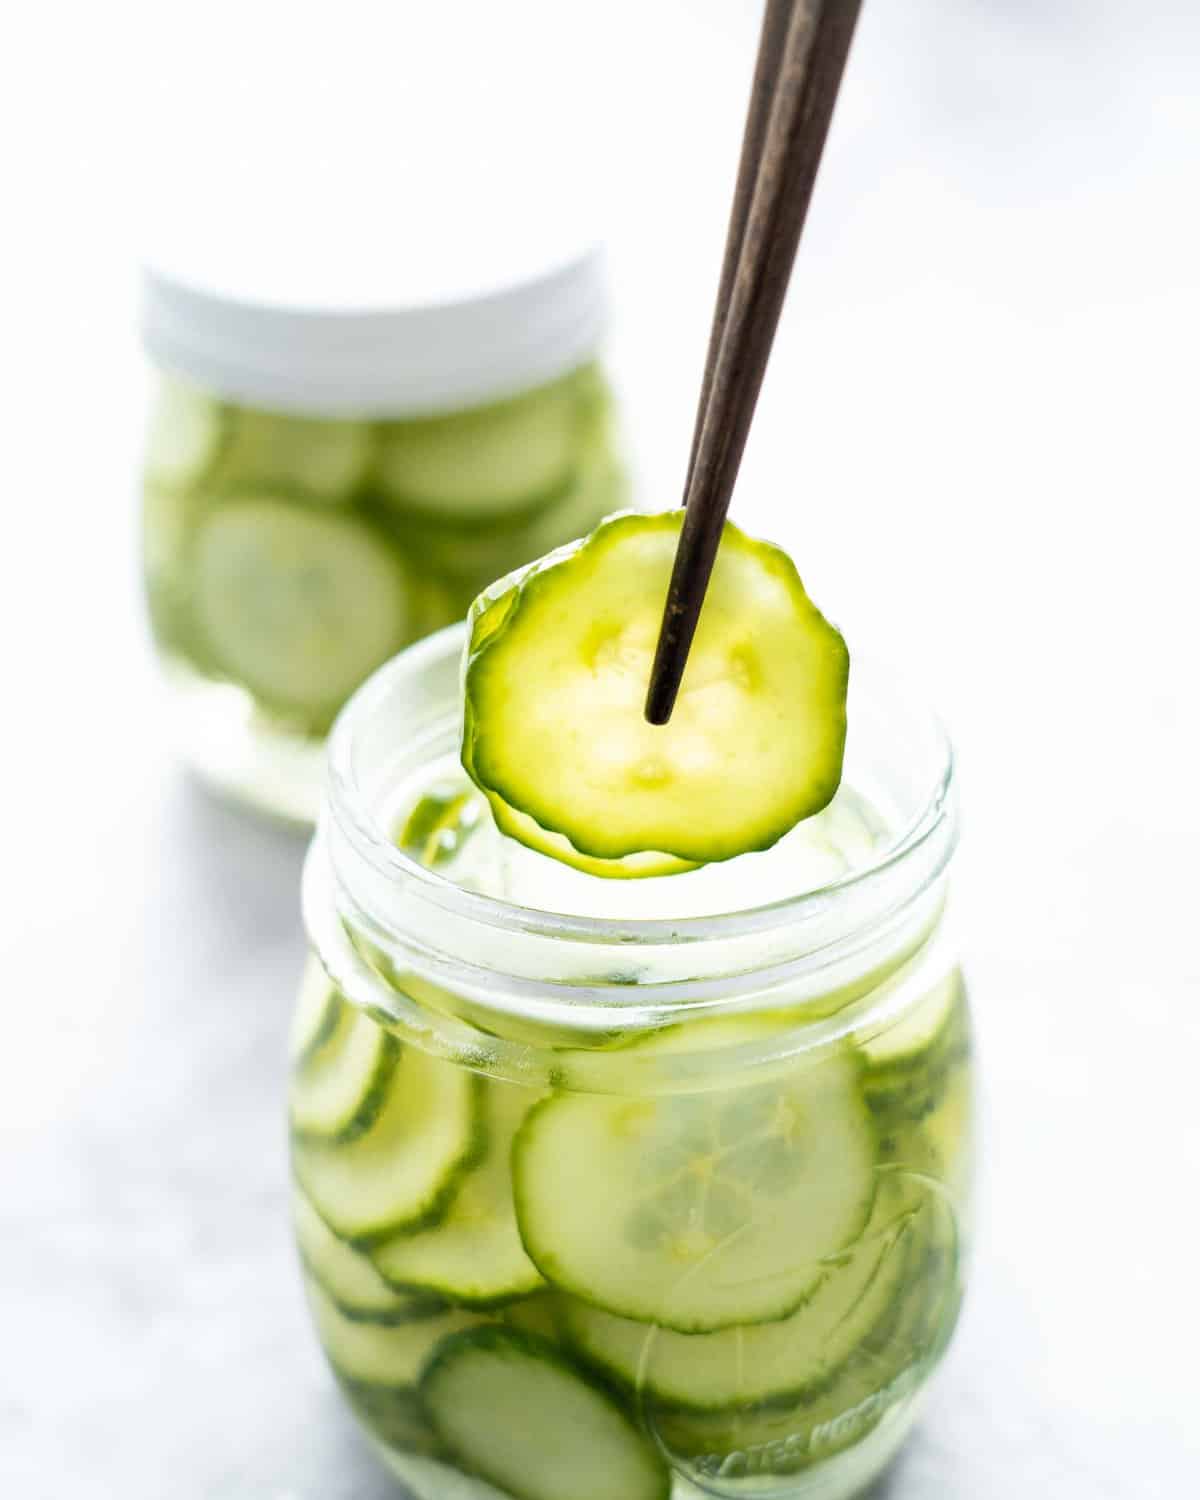 Two slices of cucumber being held with chopsticks above a jar of pickled cucumbers